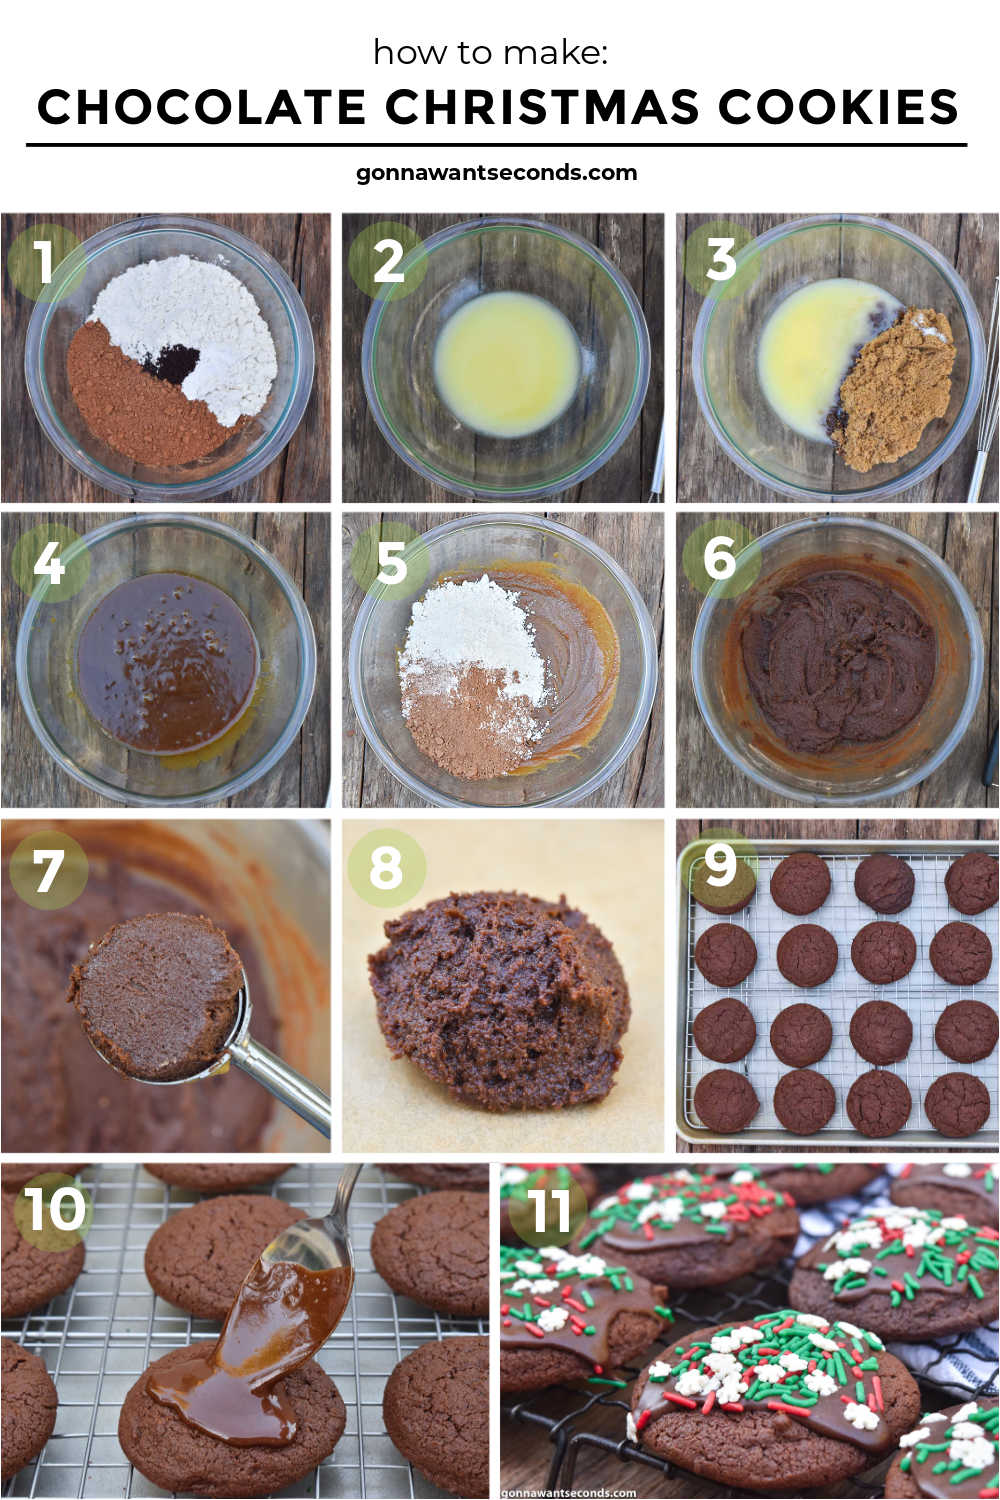 Step by step how to make chocolate christmas cookies